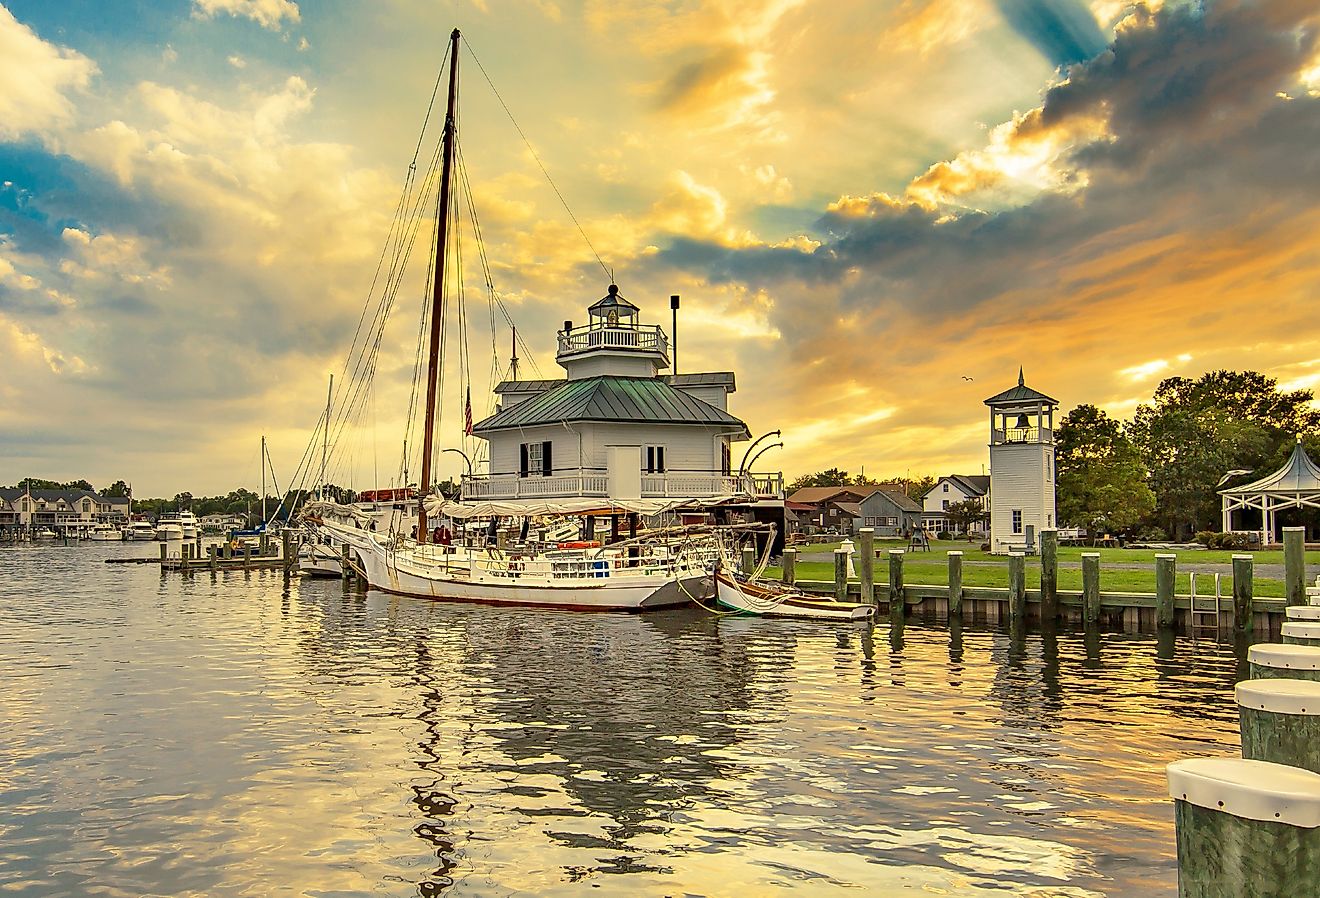 Lighthouse at St Michael's, Maryland.